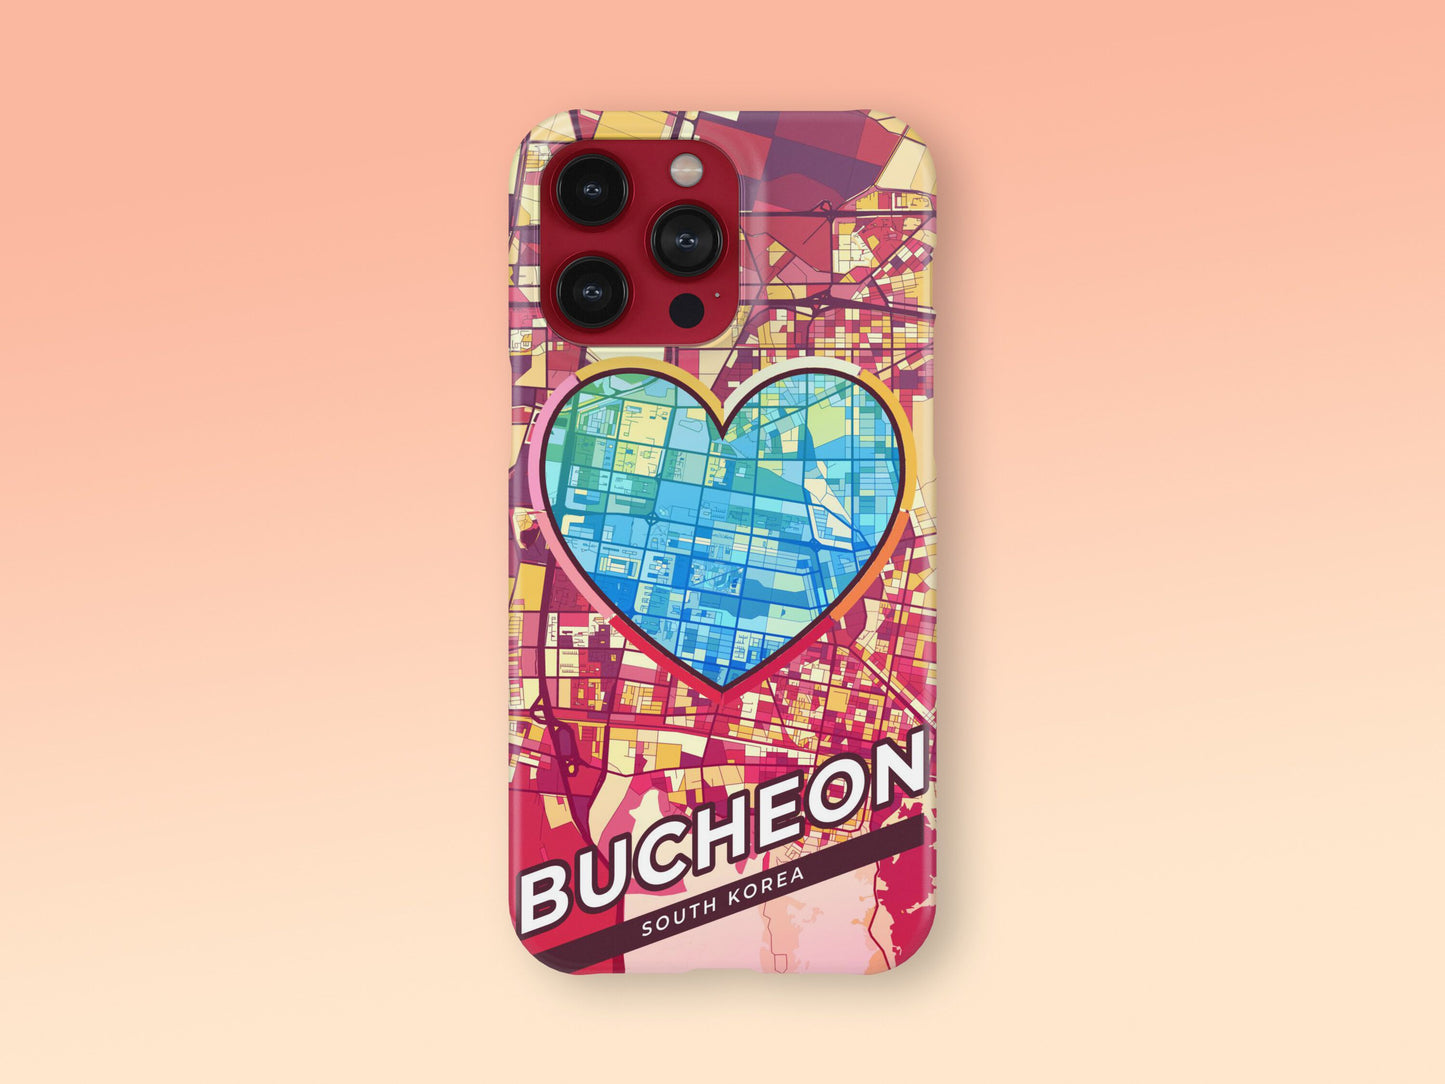 Bucheon South Korea slim phone case with colorful icon. Birthday, wedding or housewarming gift. Couple match cases. 2